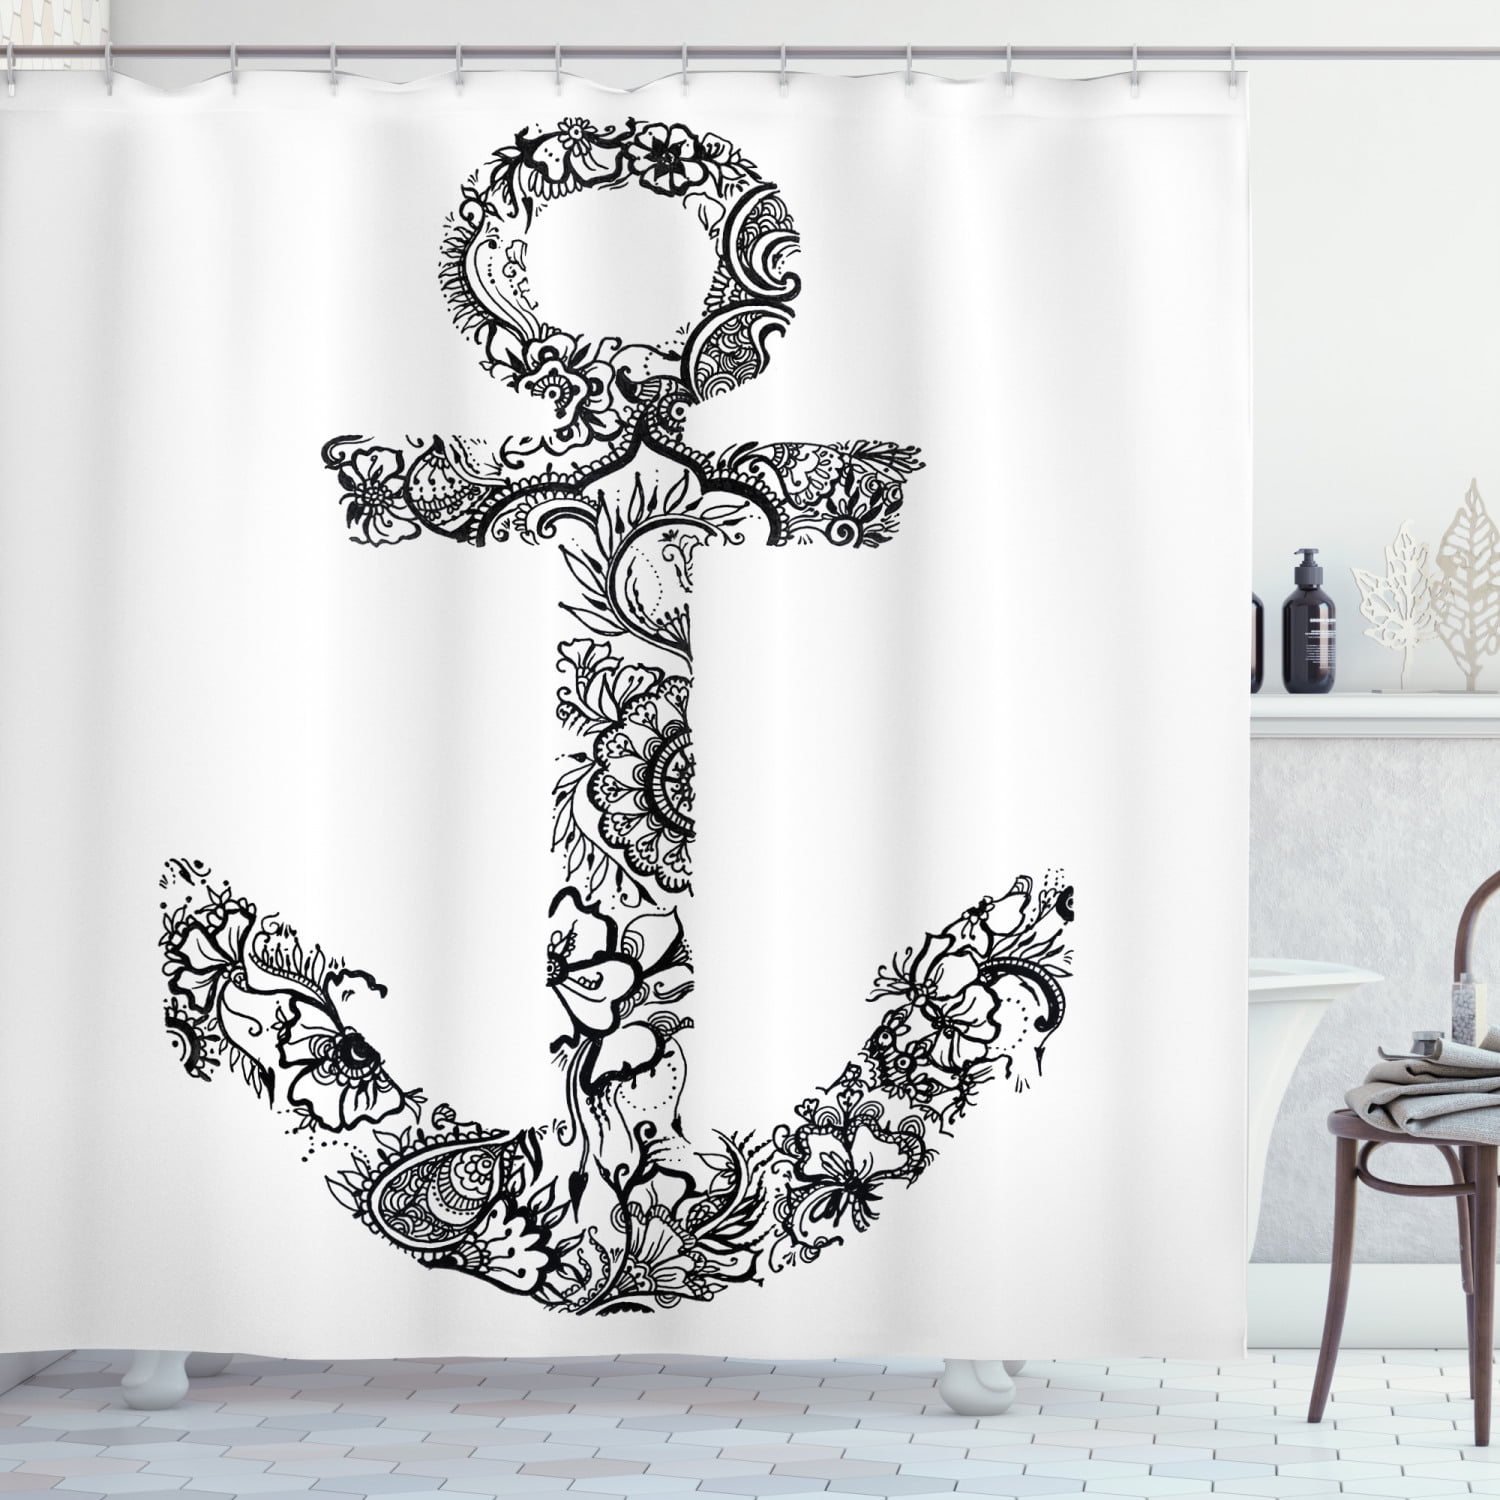 New Nautical Theme Rusty Anchor and Rope Shower Curtain Bathroom Fabric 12Hooks 